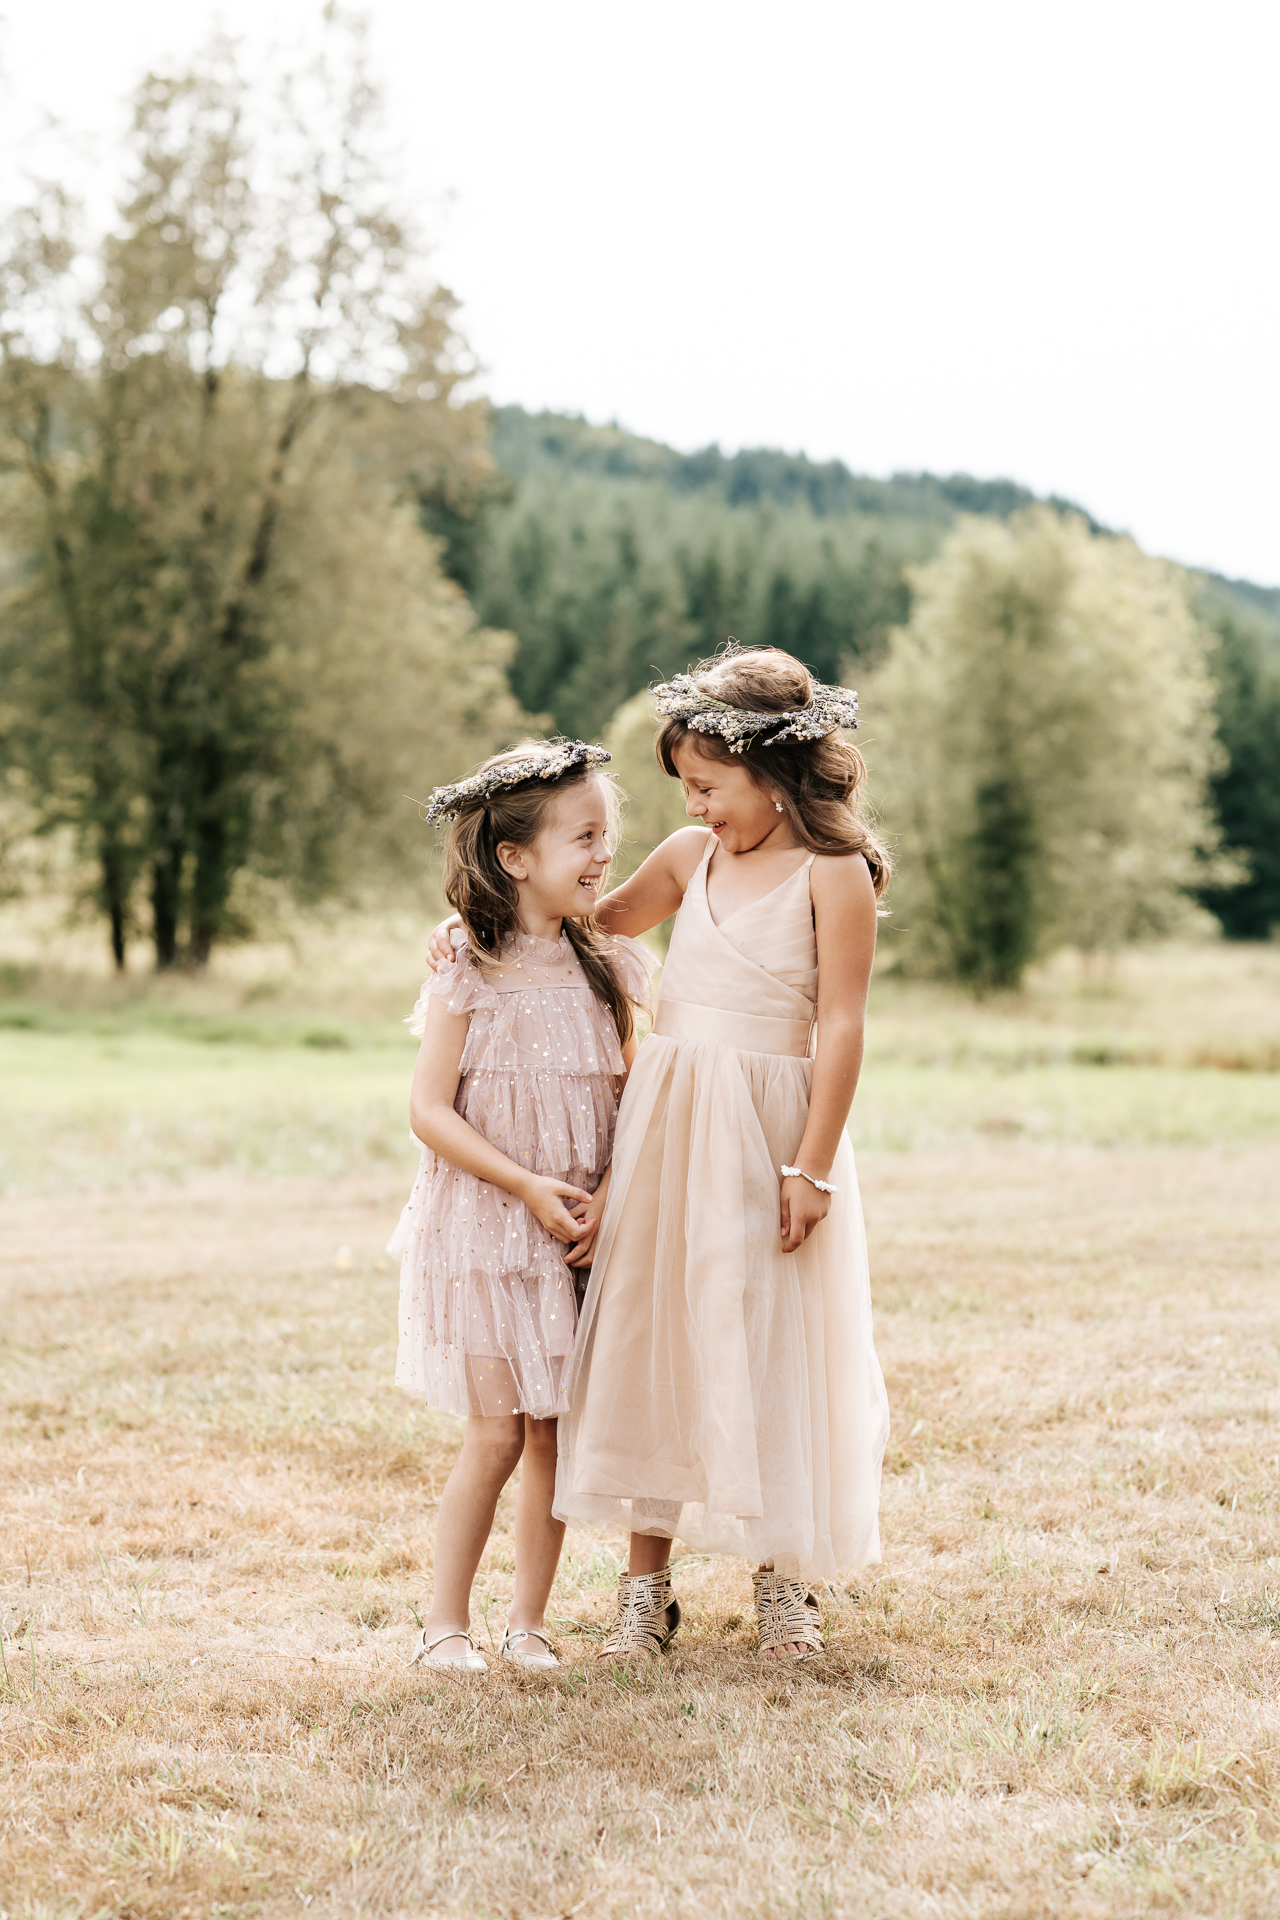 Flower girls giggling to each other wearing dresses and lavender flower crowns